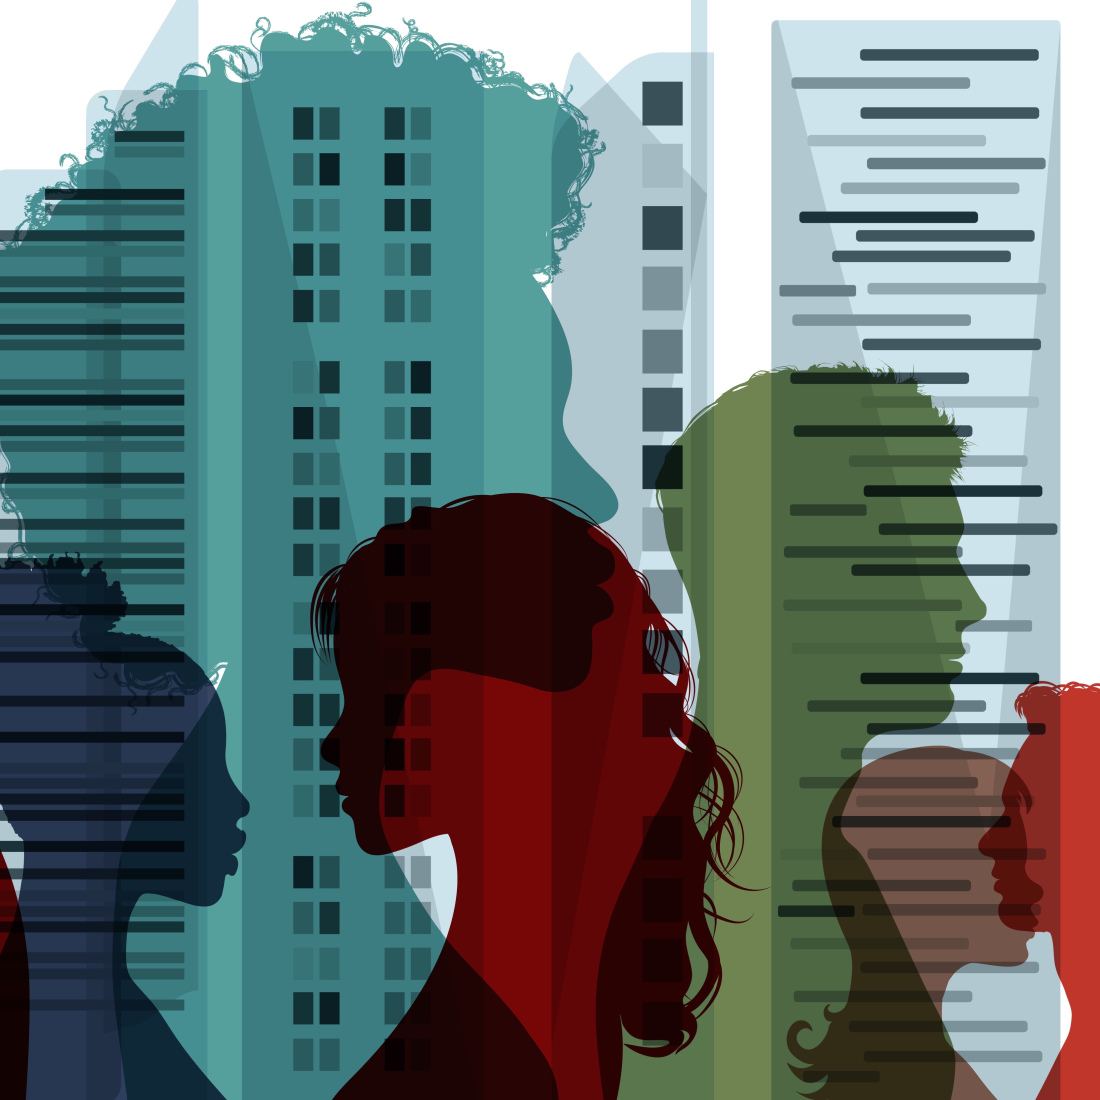 Illustration of many people's silhouettes in a city, in different sizes and colors.